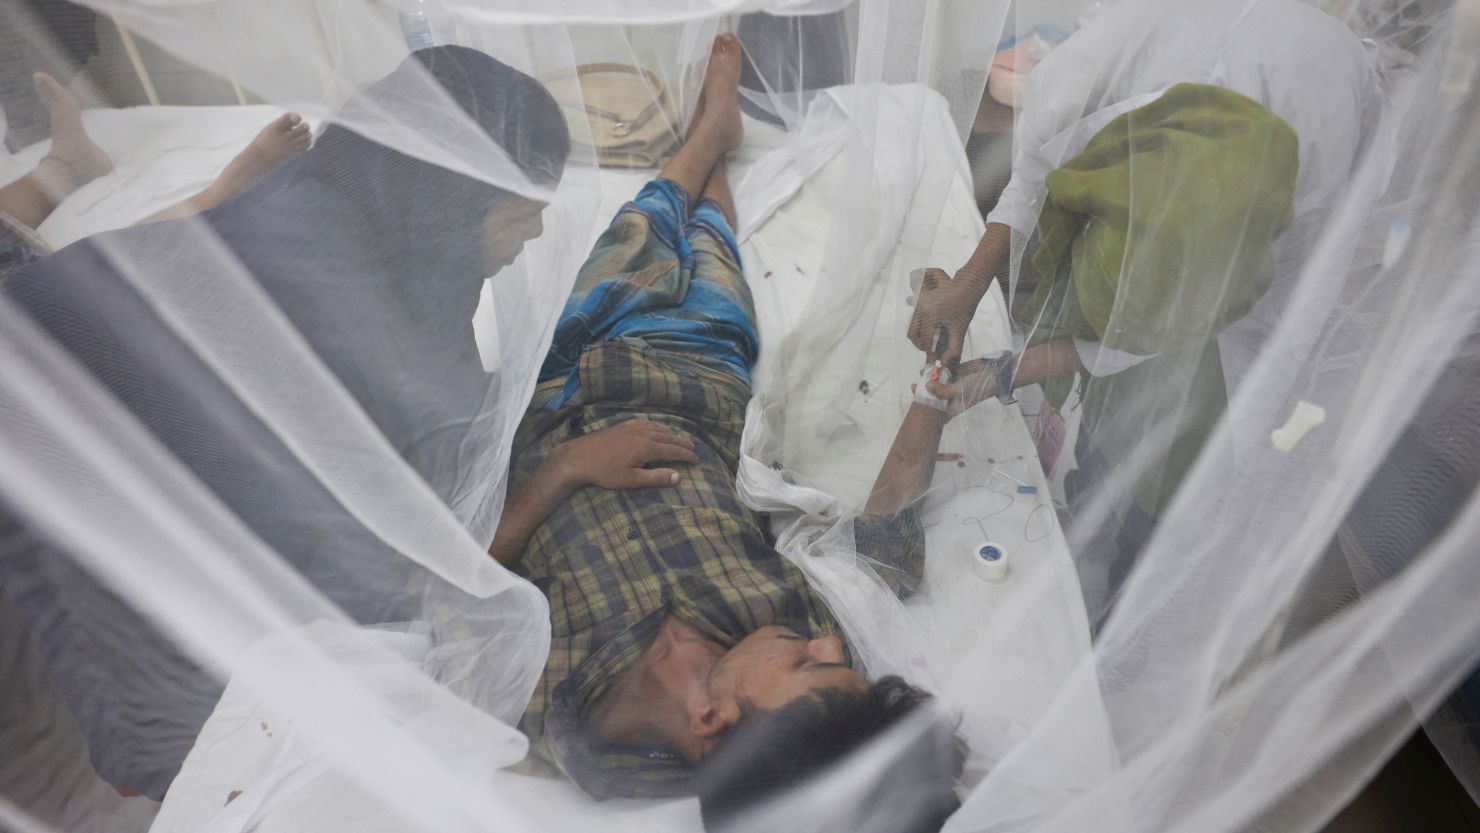 A dengue-infected patient receives treatment through mosquito nets in the Shaheed Suhrawardy Medical College and Hospital in Dhaka, Bangladesh, on July 26.